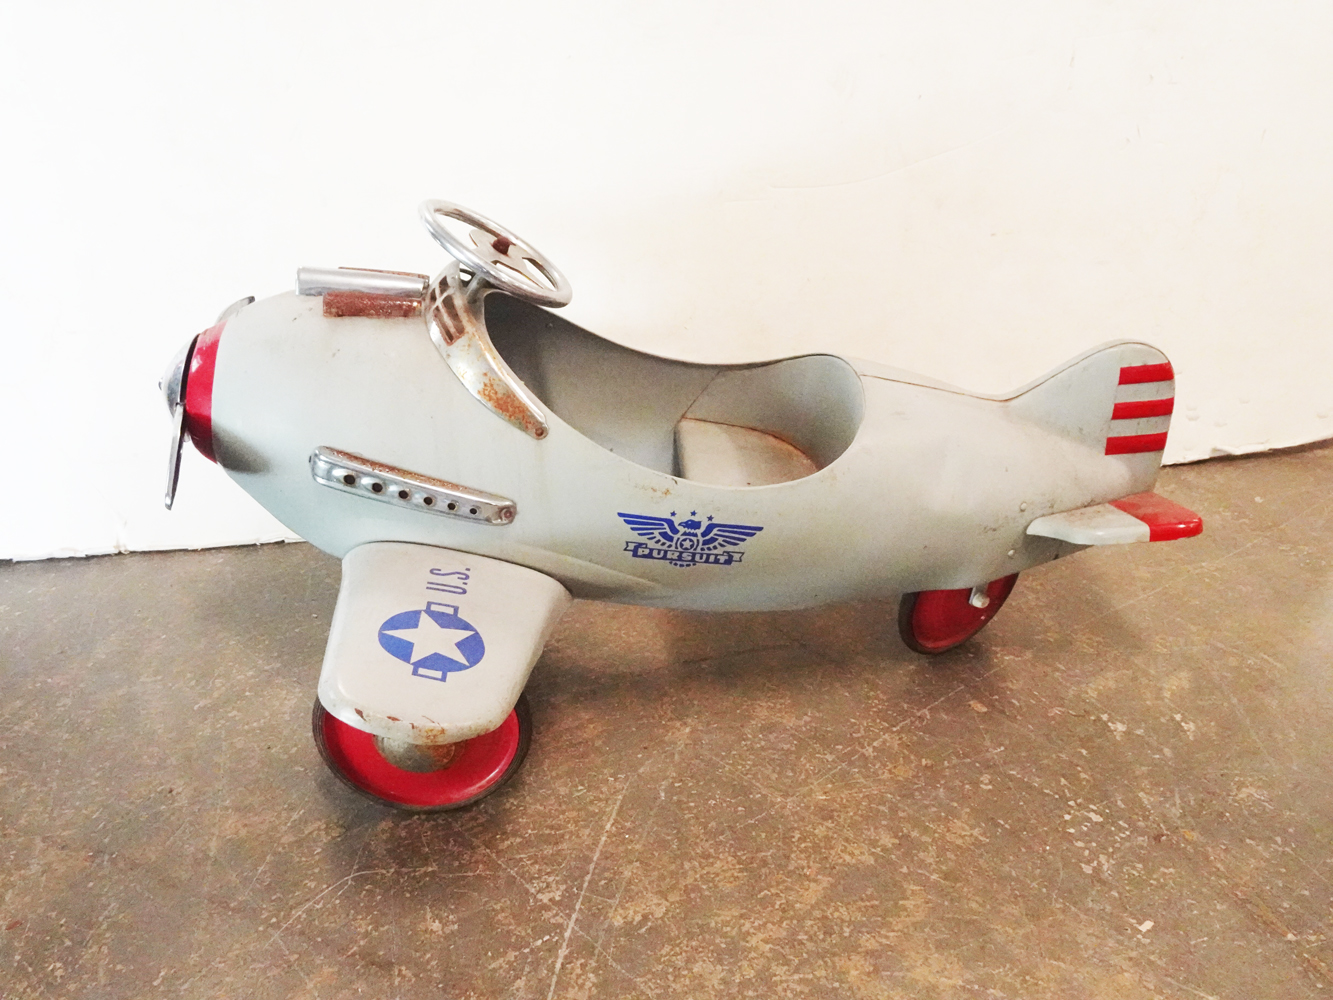 1960s or 1970s Murray Airflow Air Pursuit pedal airplane, 47in long with a 36in wingspan, tip to tip. Complete and in working order. Est. $250-$500. Image courtesy of Stephenson’s Auction